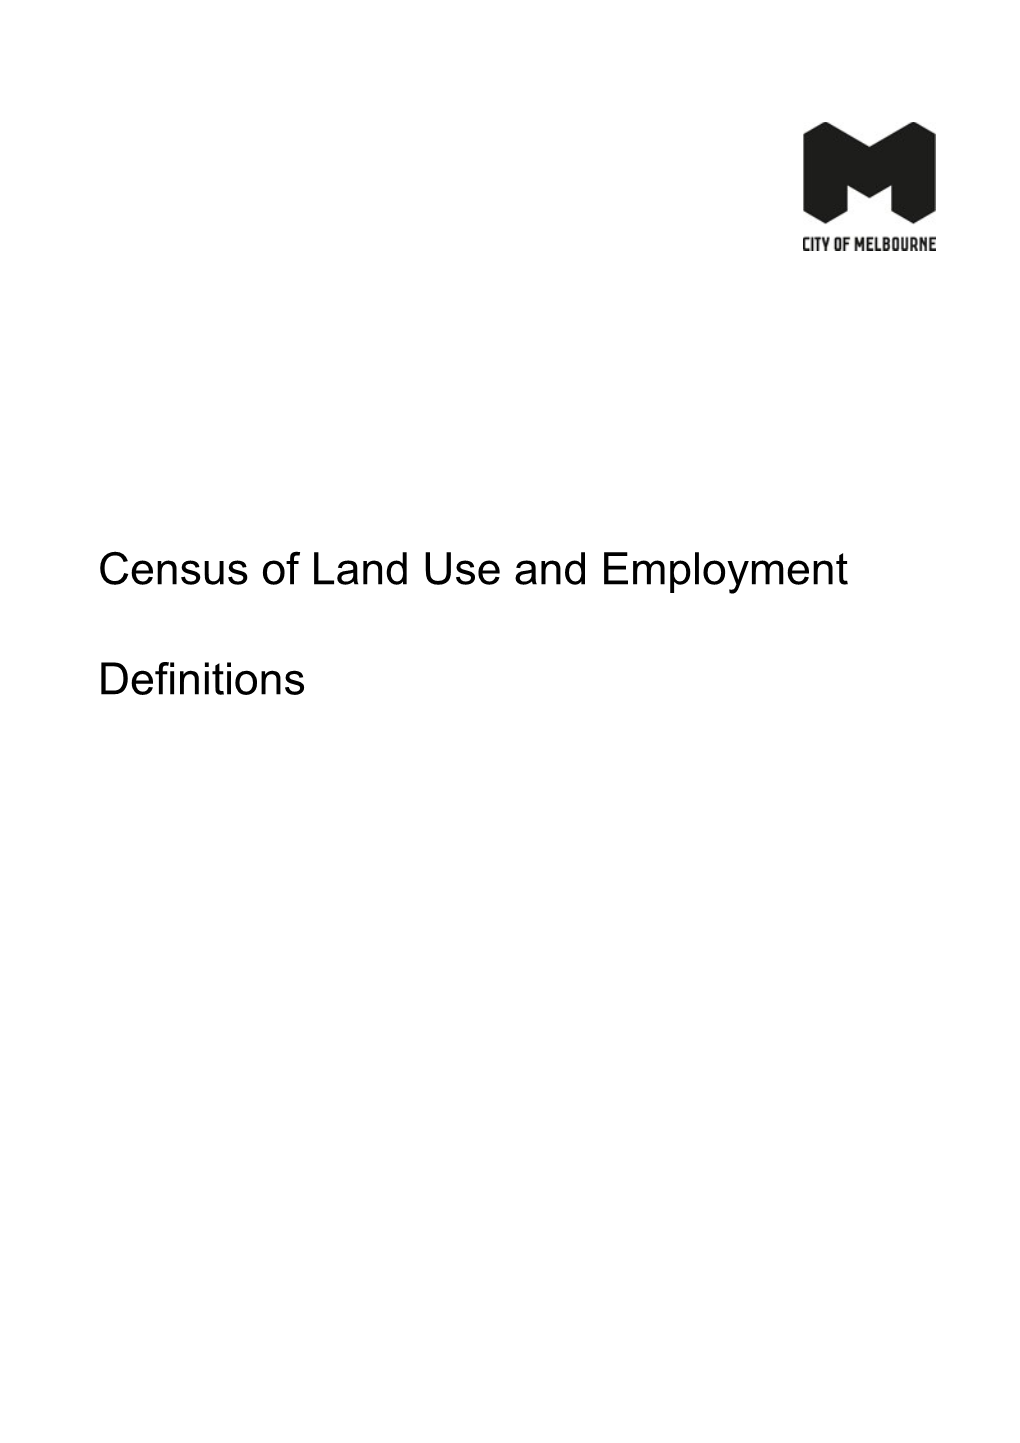 Census of Land Use and Employment - Definitions